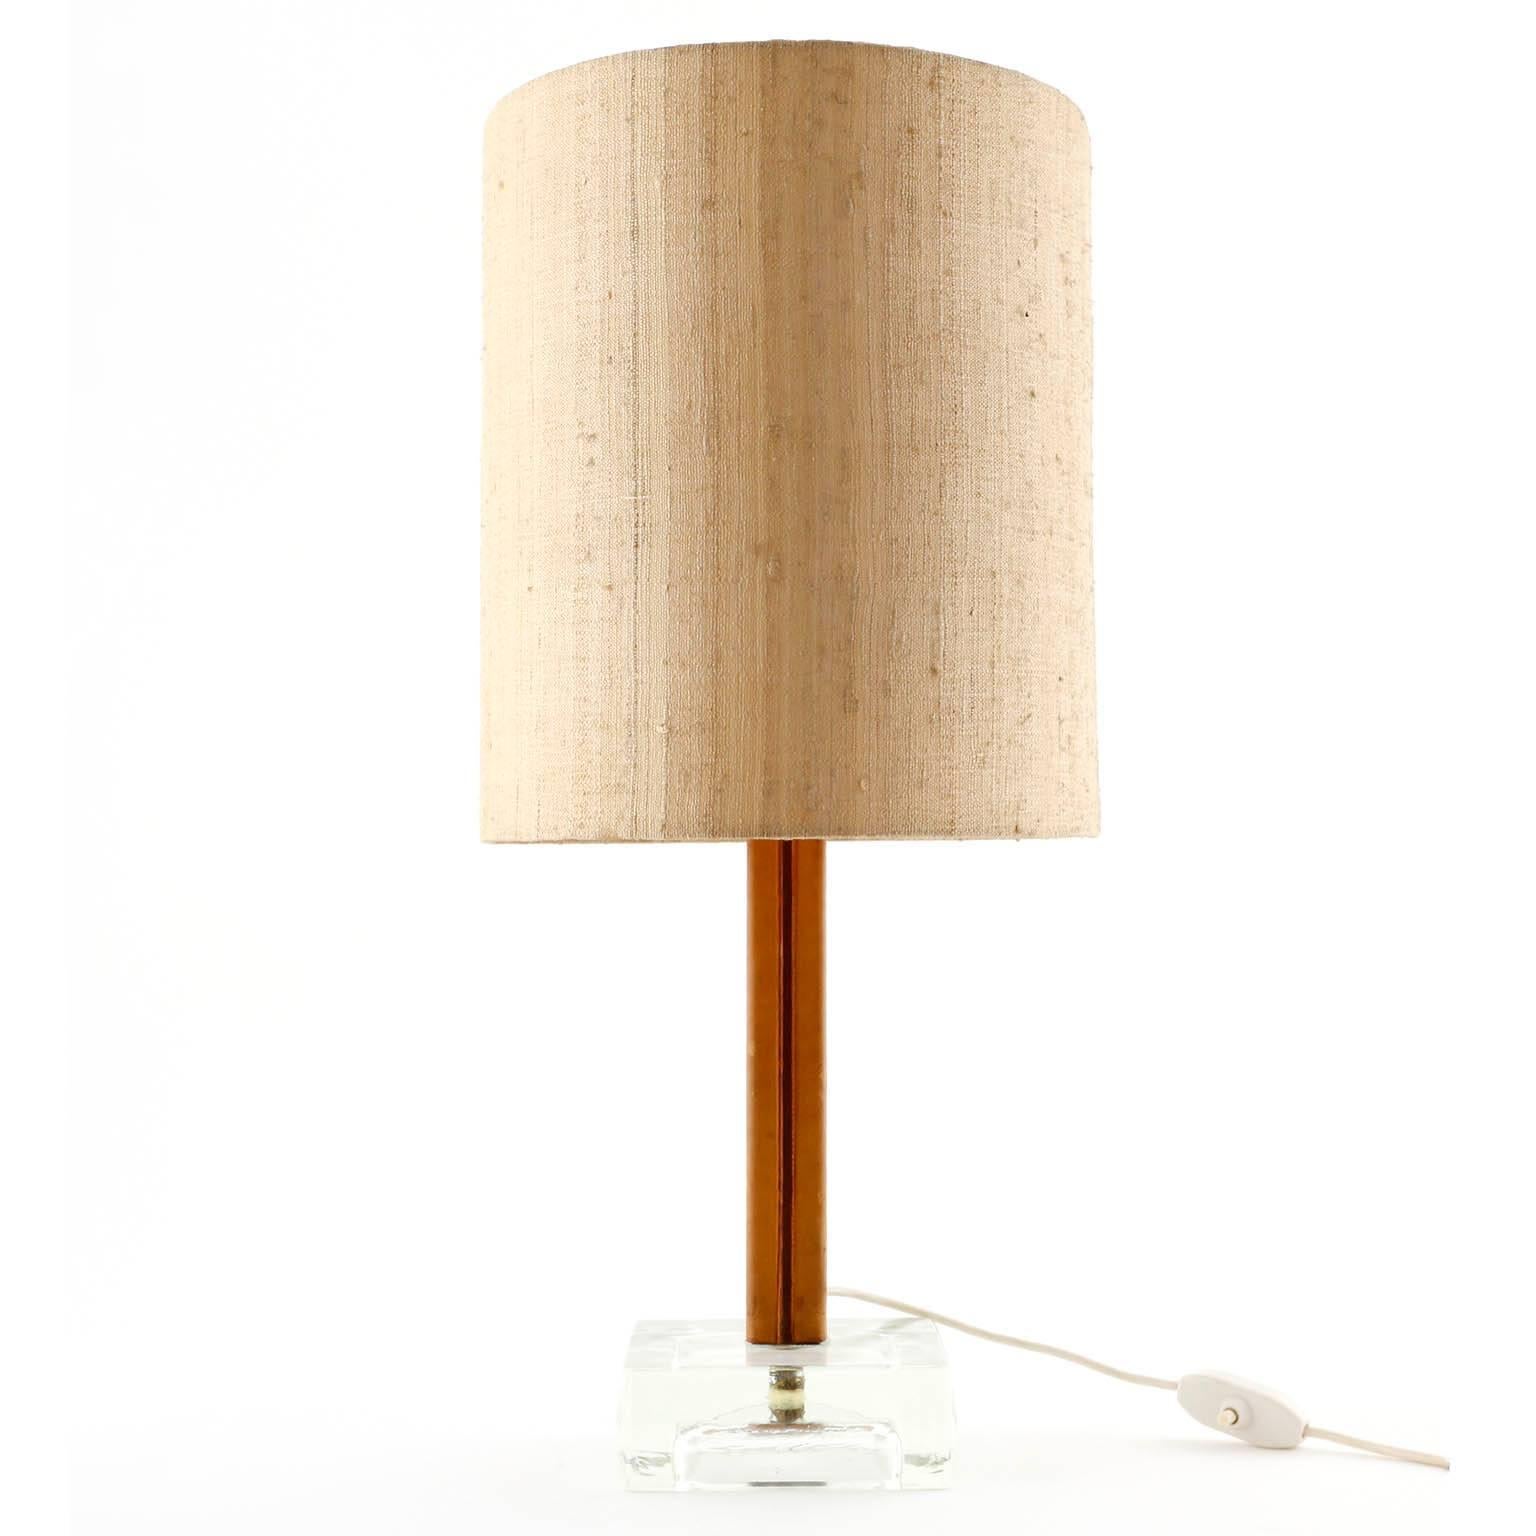 A table lamp by J.T. Kalmar, Austria, Vienna, manufactured in midcentury, circa 1960.
The stand is made of a square frosted glass base and a leather wrapped black enameled metal stem. The original lampshade is made of Indian silk and is in very